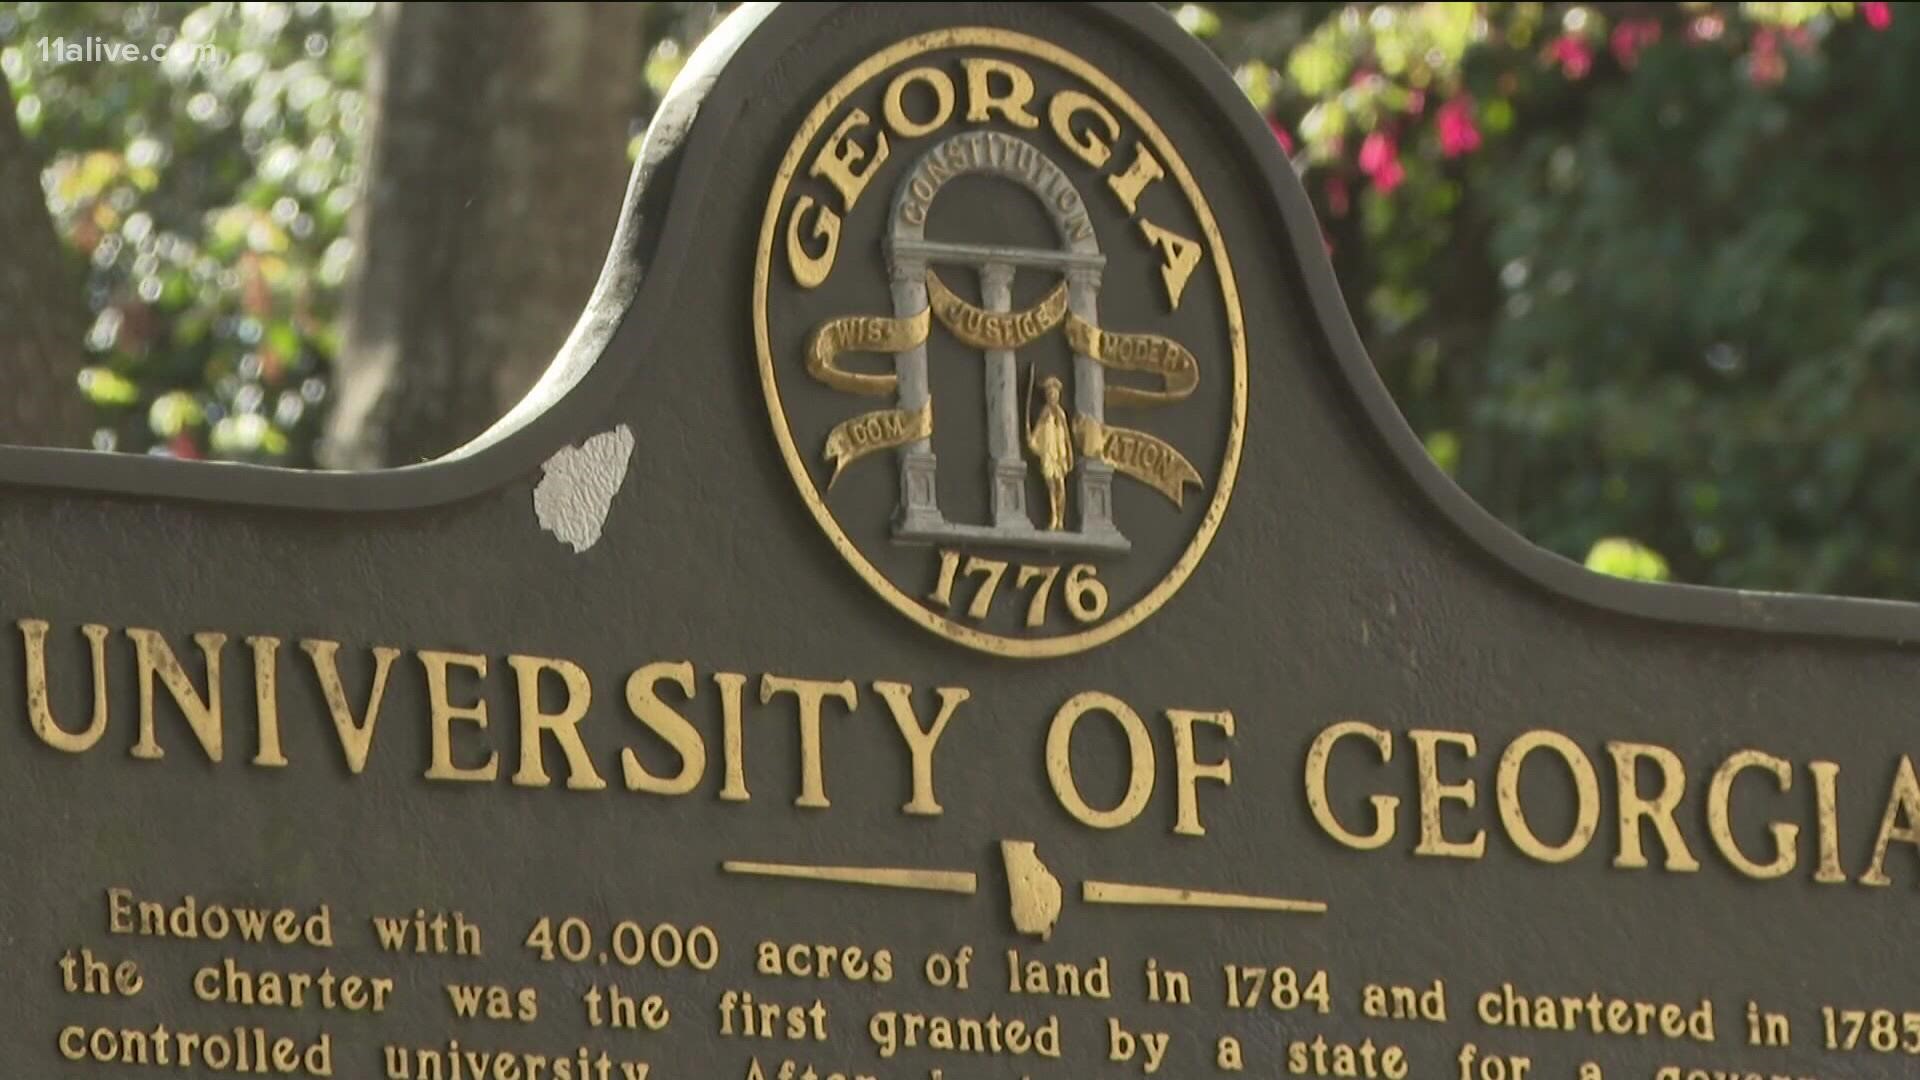 As universities struggle to retain students, the University of Georgia is tallying is its highest enrollment yet.